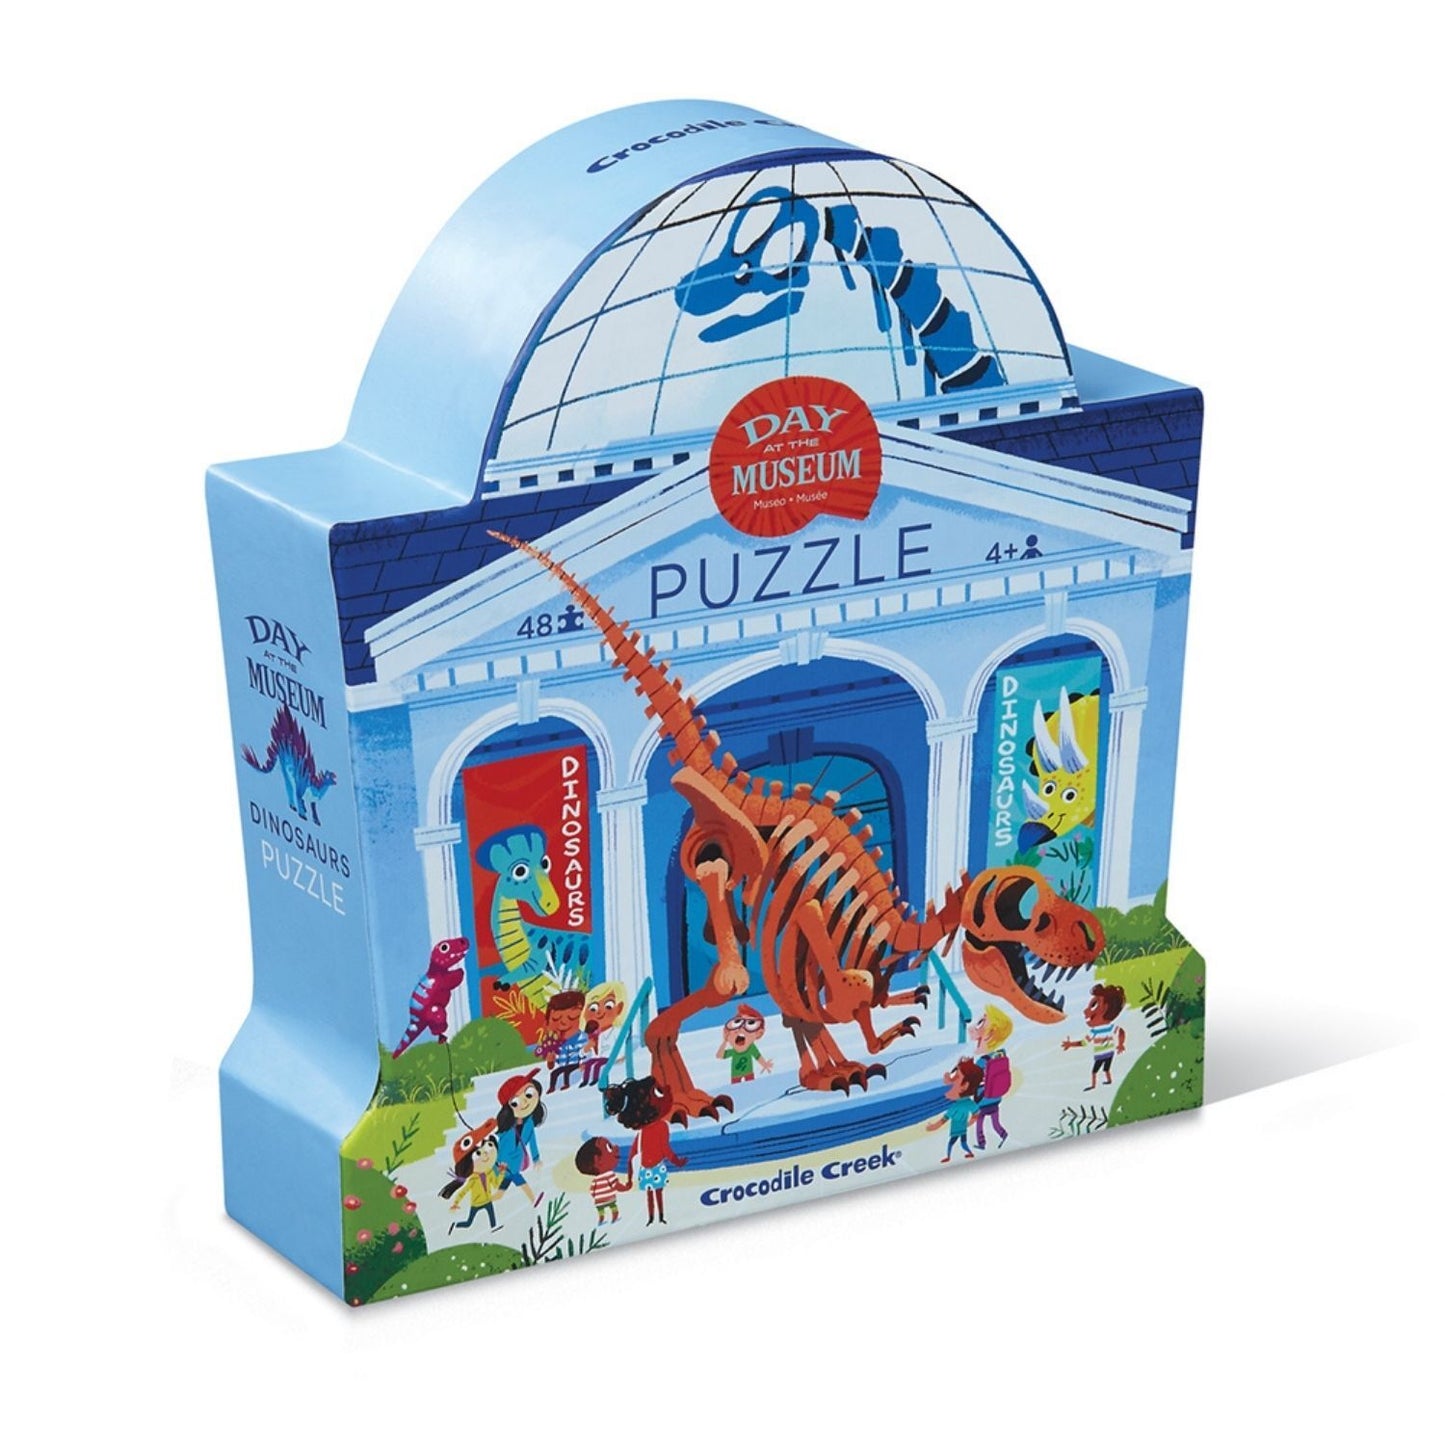 Day at the Museum Puzzle 48pc - Dinosaur